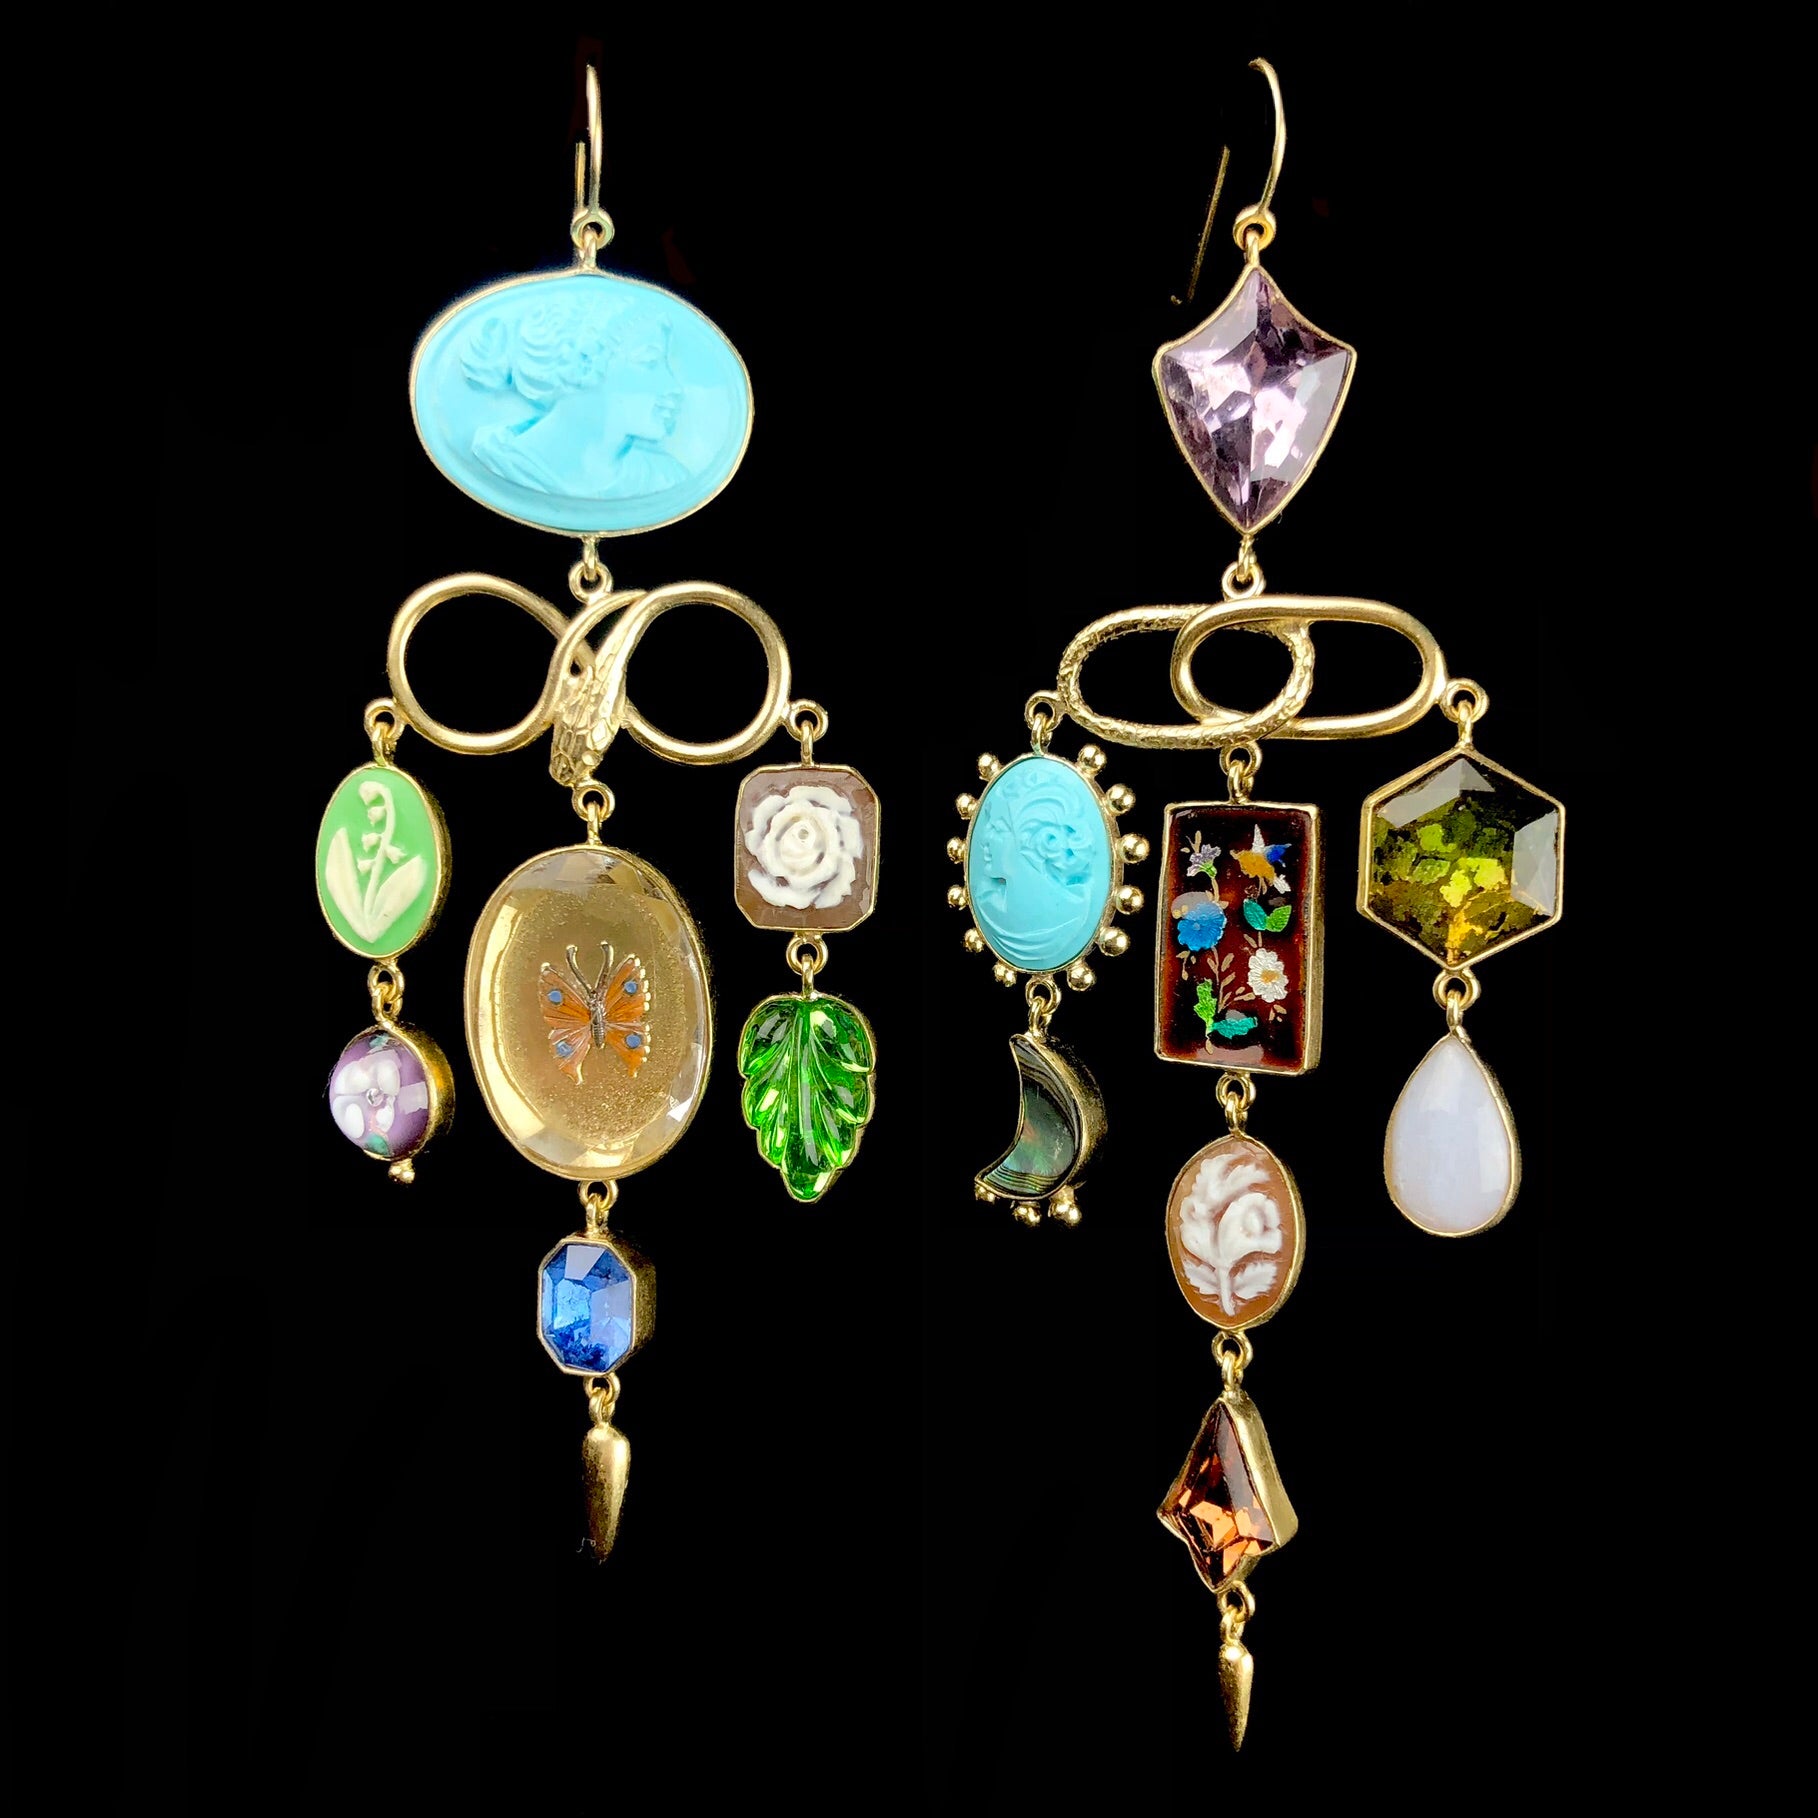 Garden and Serpent Drop Earrings shown hanging side by side